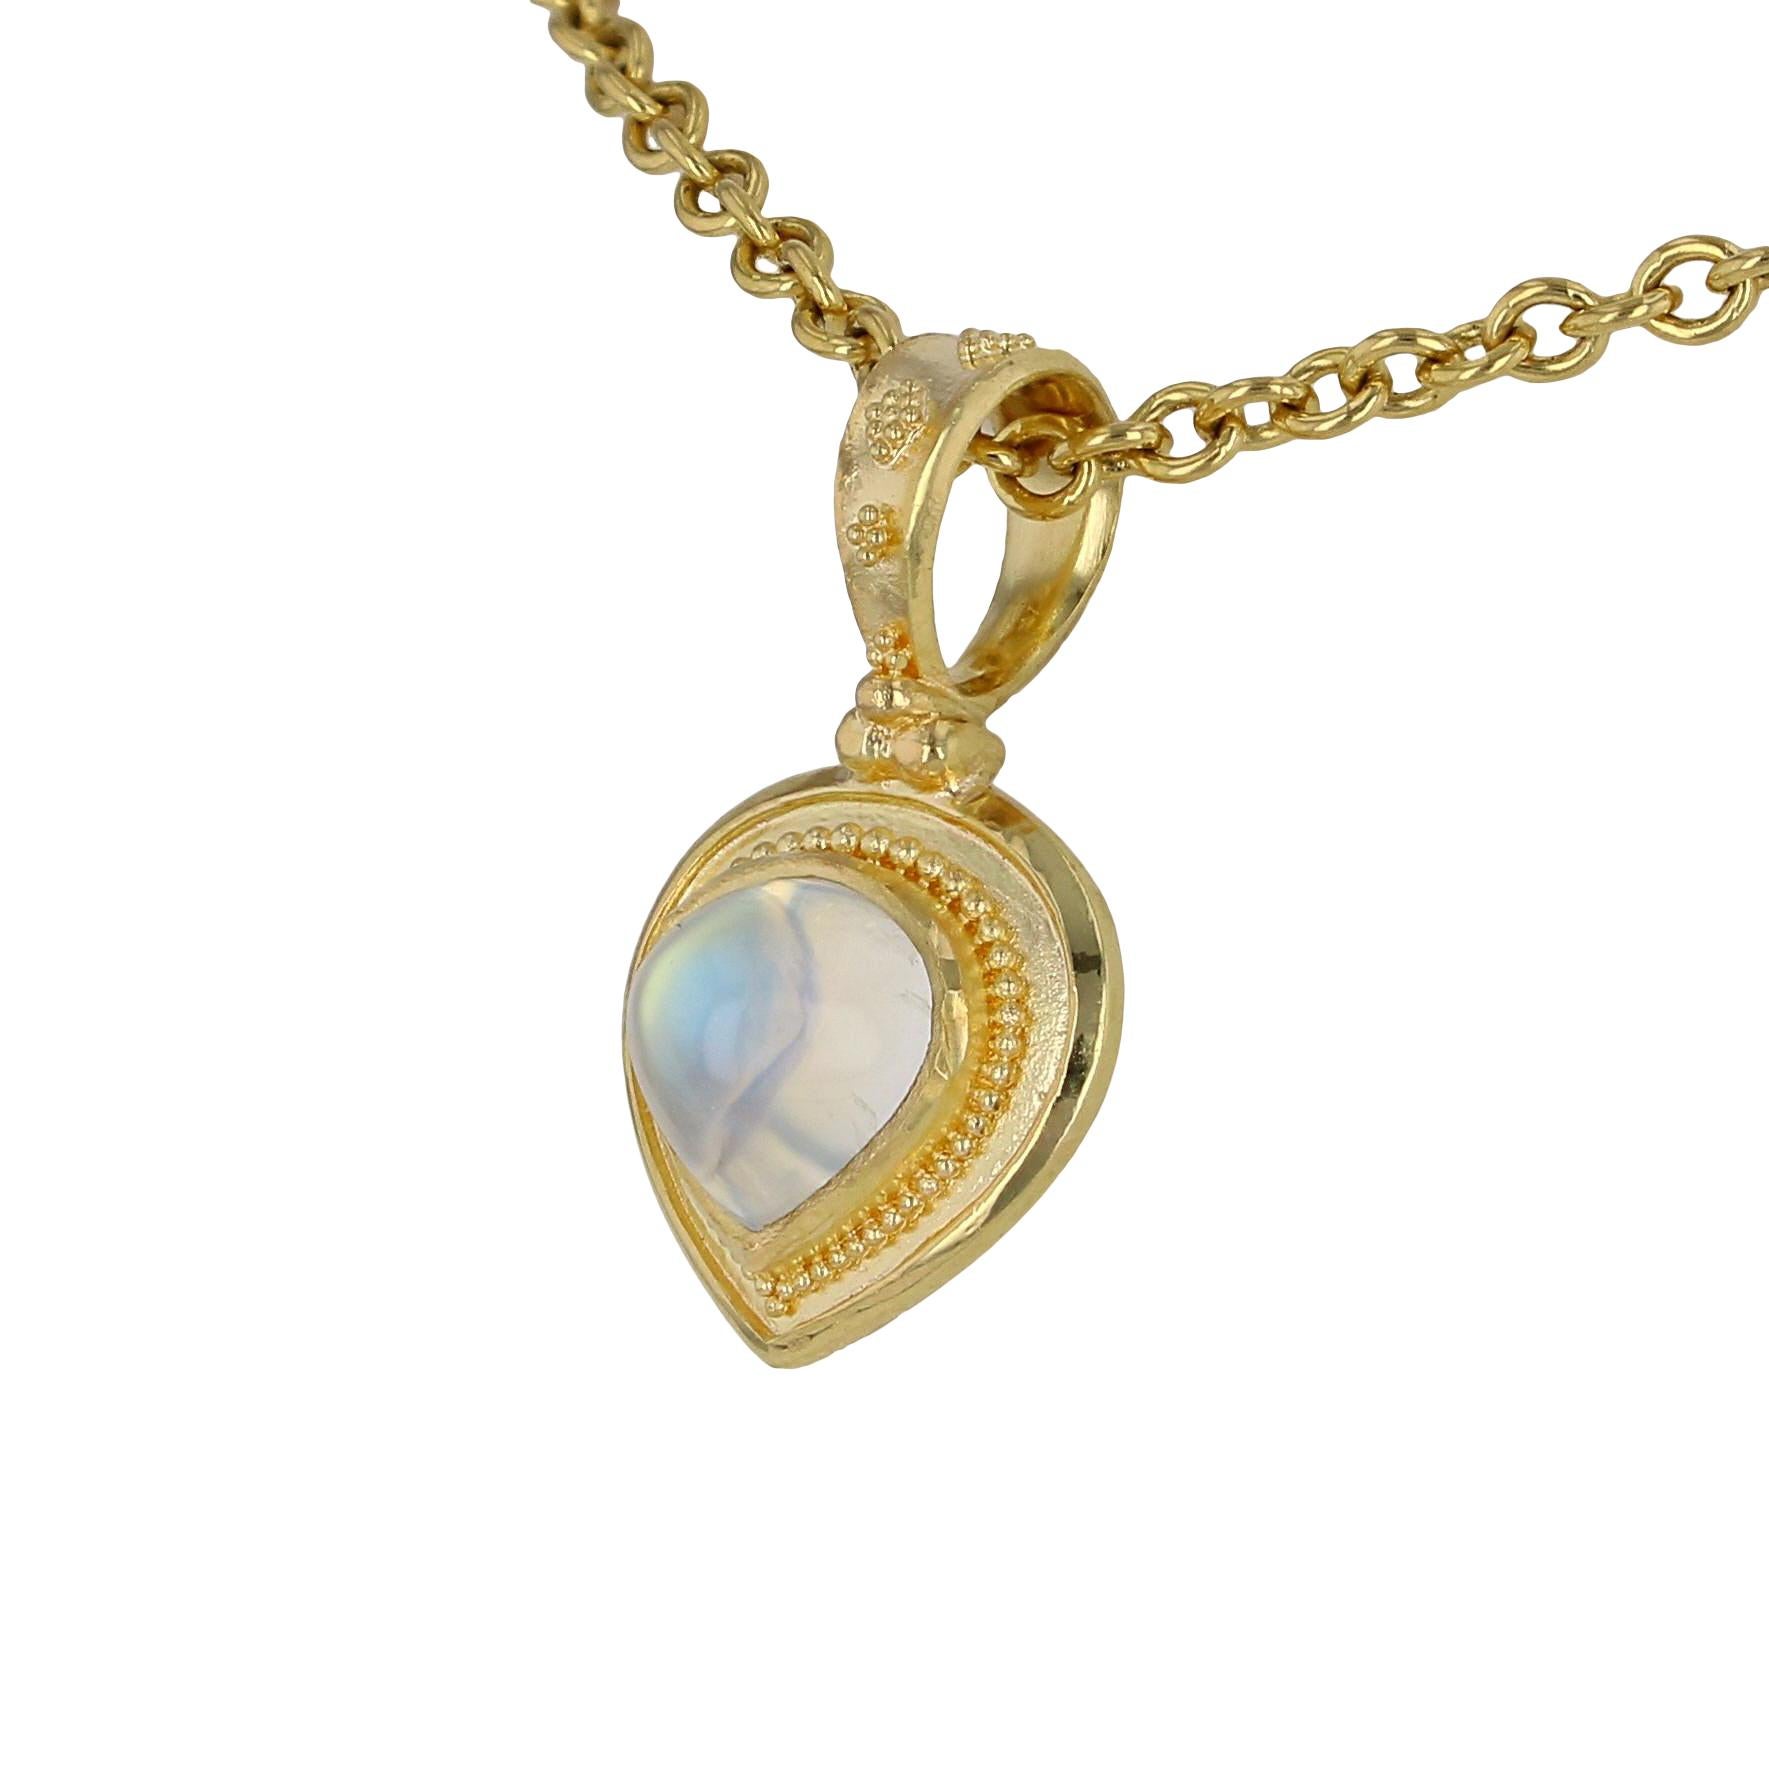 Kent Raible's lovely Rainbow Moonstone Pendant is simply elegant. The luster of the moonstone is what is prominent & Raible frames it with fine granulation. 
Chain sold separately

Moonstone 2.0ct 8mmx8mm pear
3.0 Grams 18Karat Gold

Unlike much